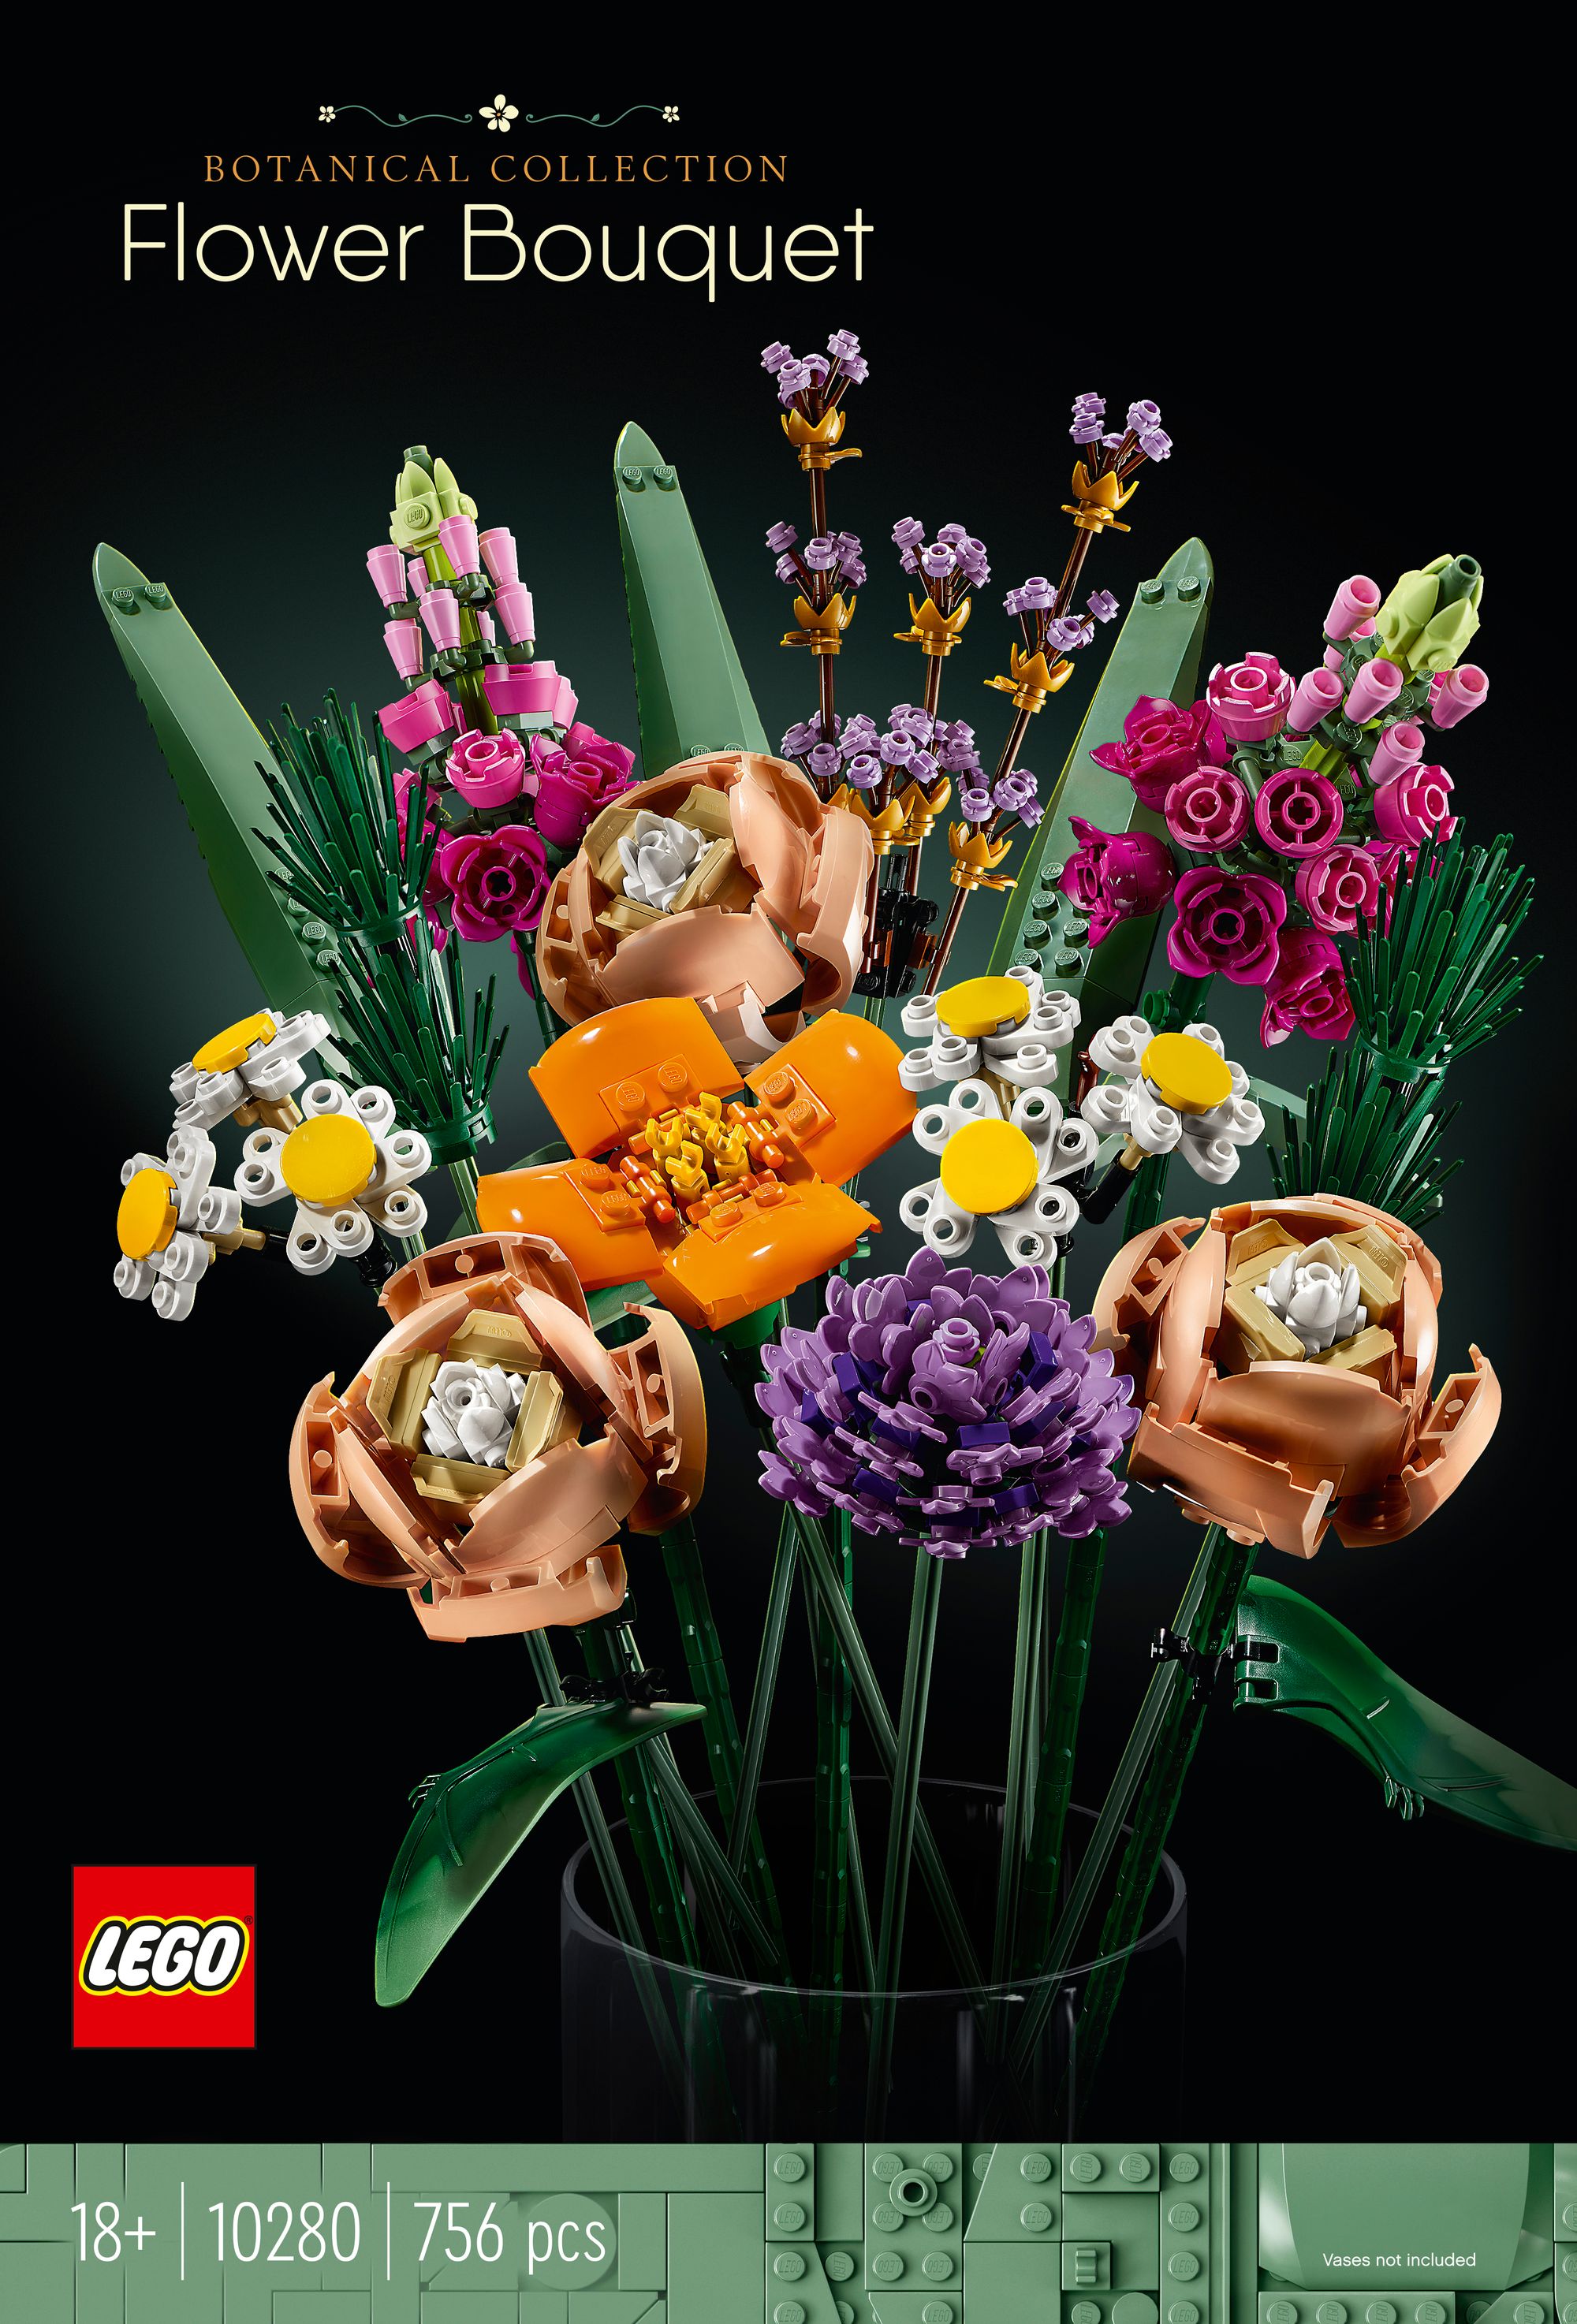 Lego Flower Bouquet review interesting build, great on display